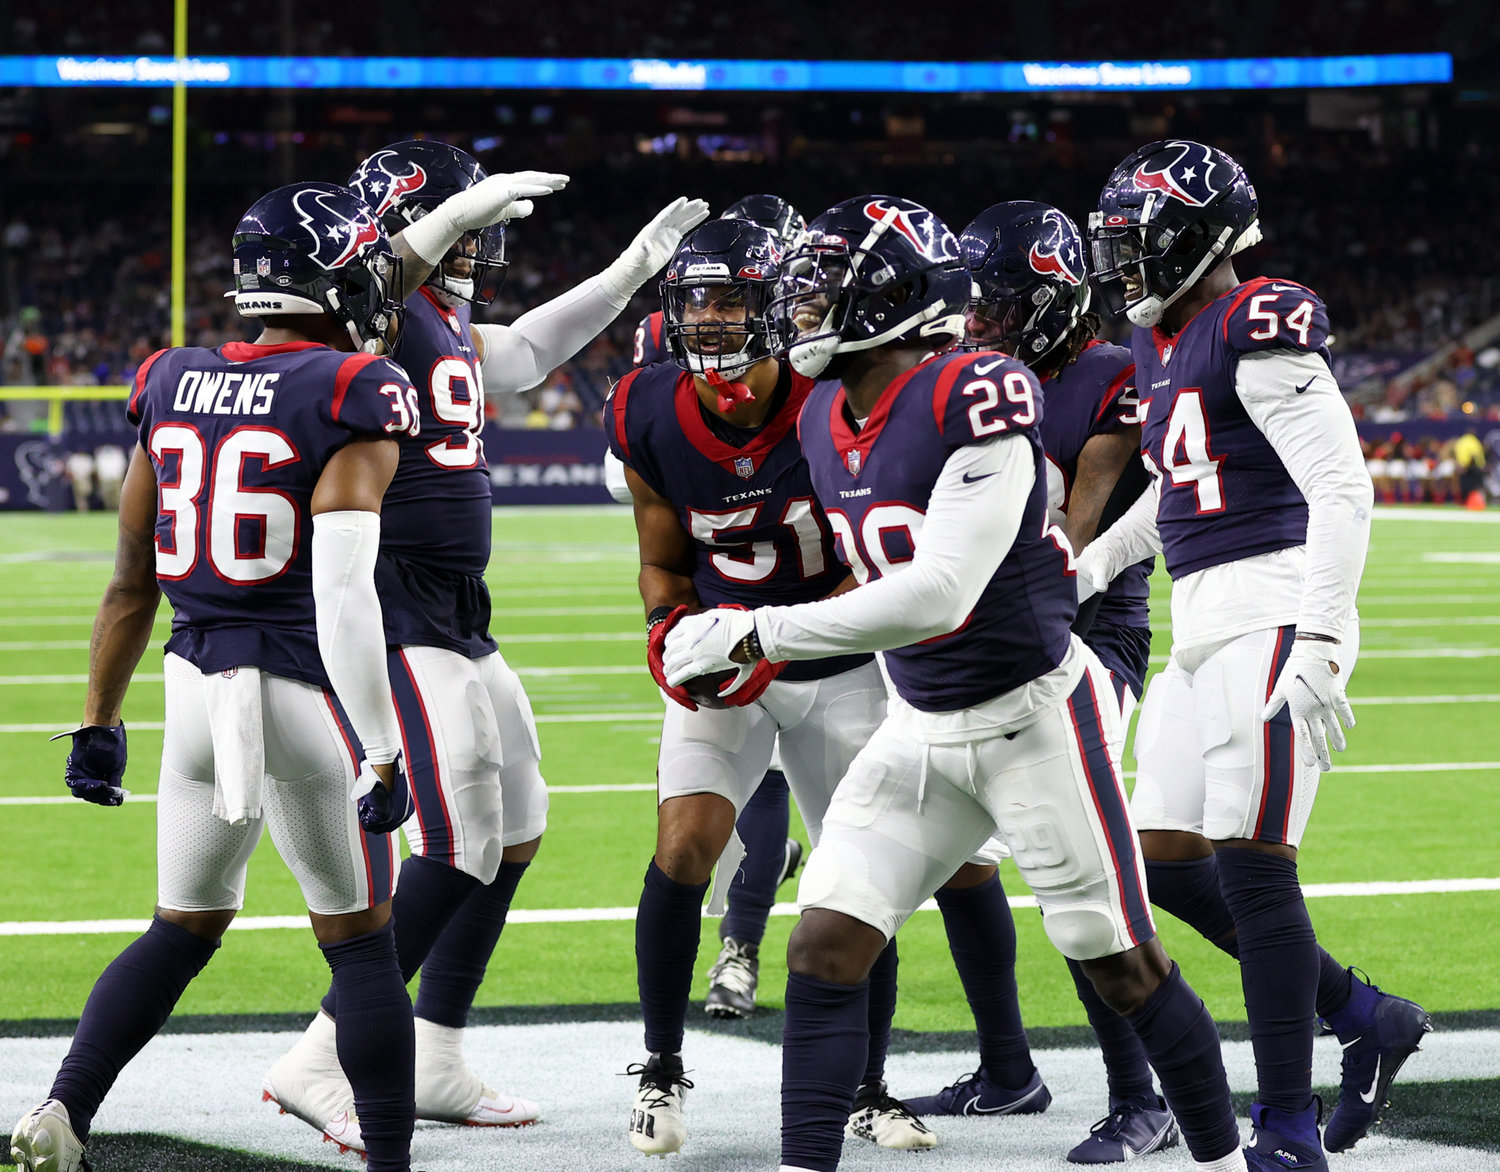 The Houston Texans defense celebrates a fumble recovery by outside linebacker Kamu Grugier-Hill (51) during an NFL preseason game between the Houston Texans and the Tampa Bay Buccaneers on August 28, 2021 in Houston, Texas.